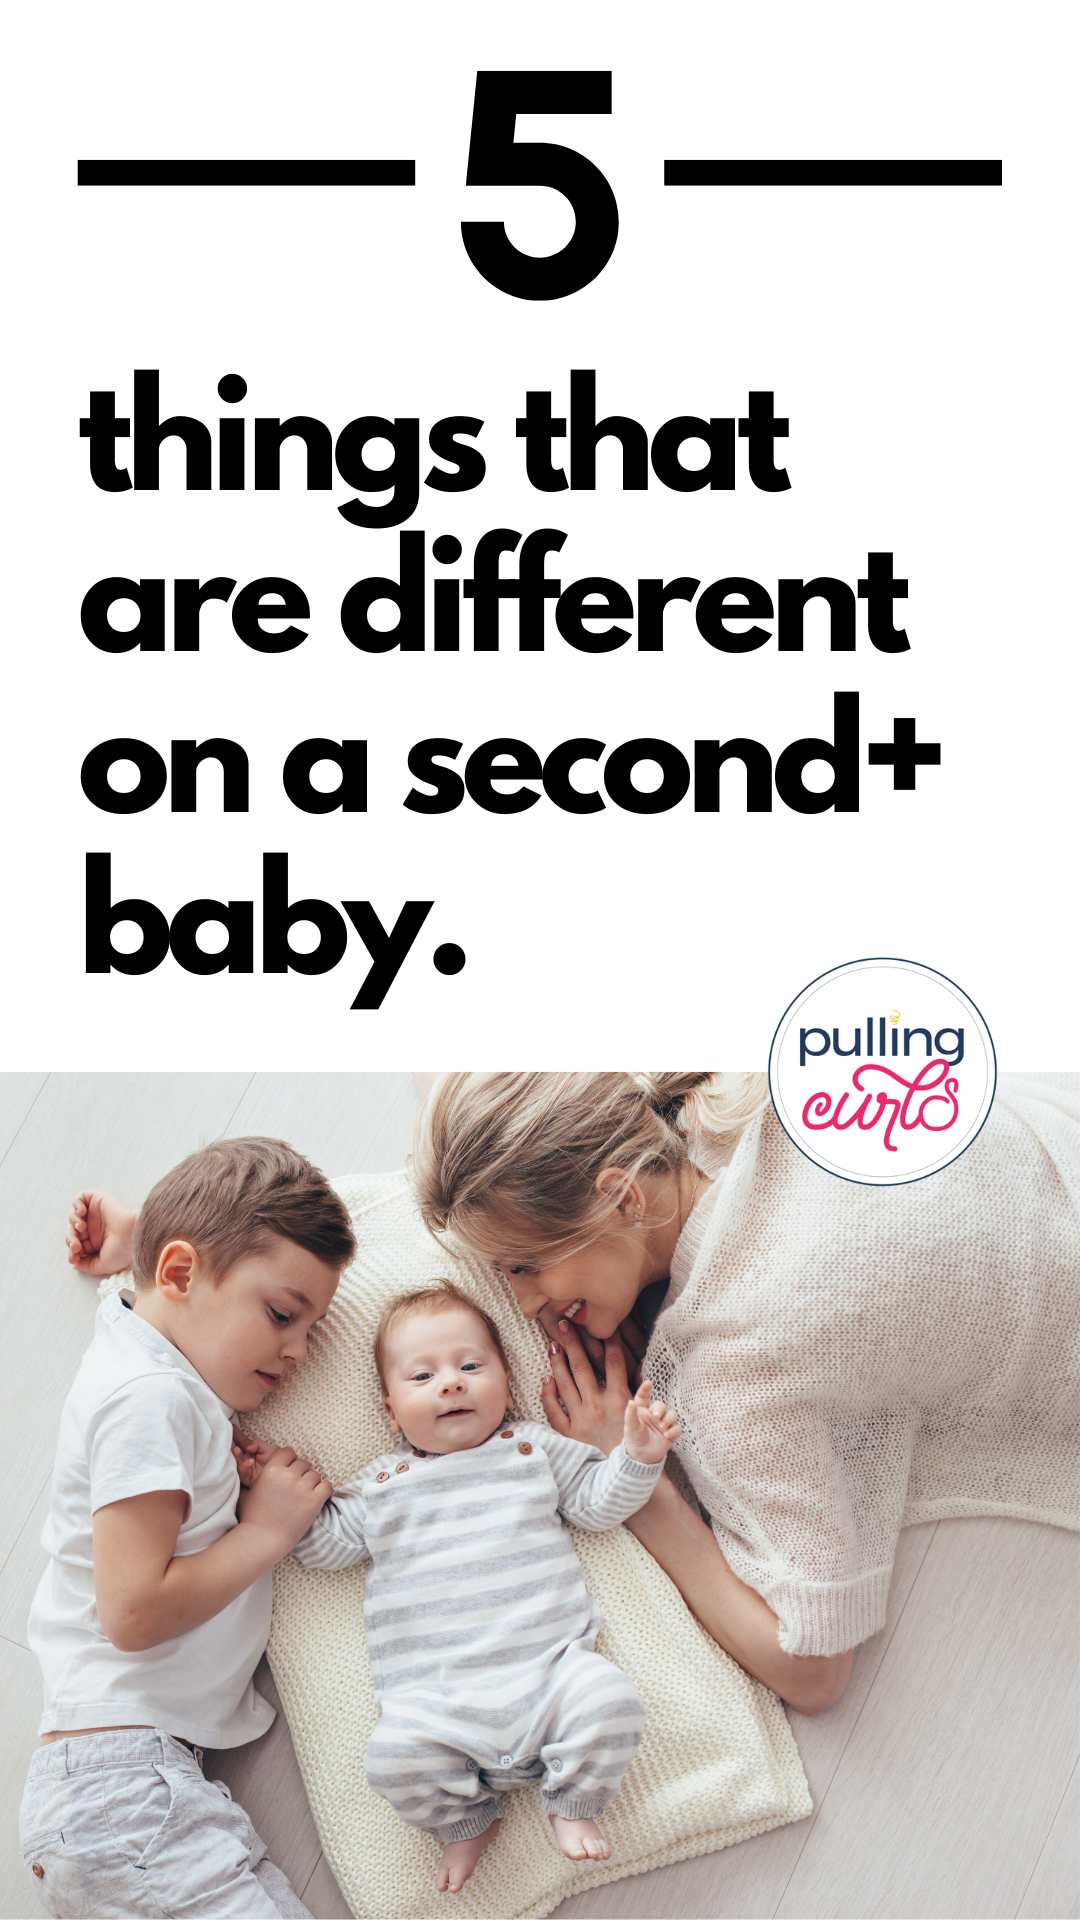 5 Things That Are Different on Your Second+ Baby via @pullingcurls